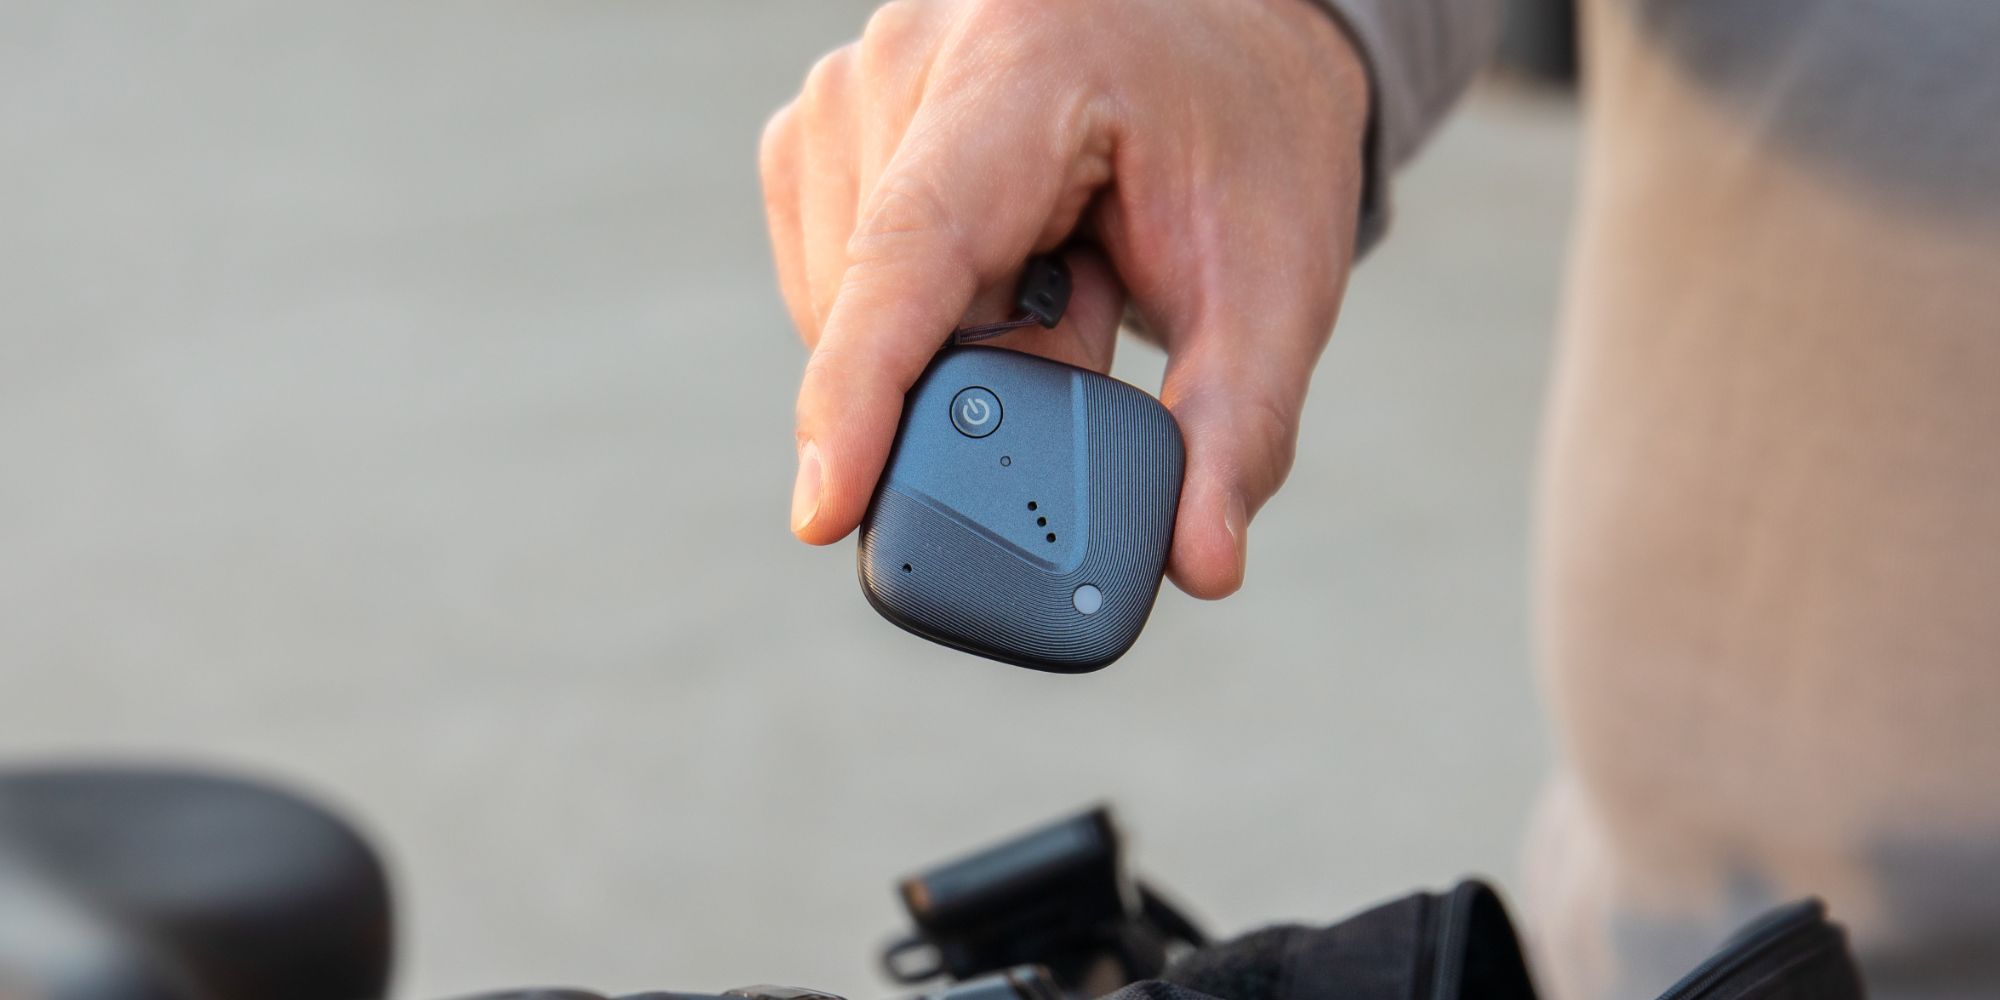 SyncUP TRACKER, A GPS Device For Your Bike, Luggage & More